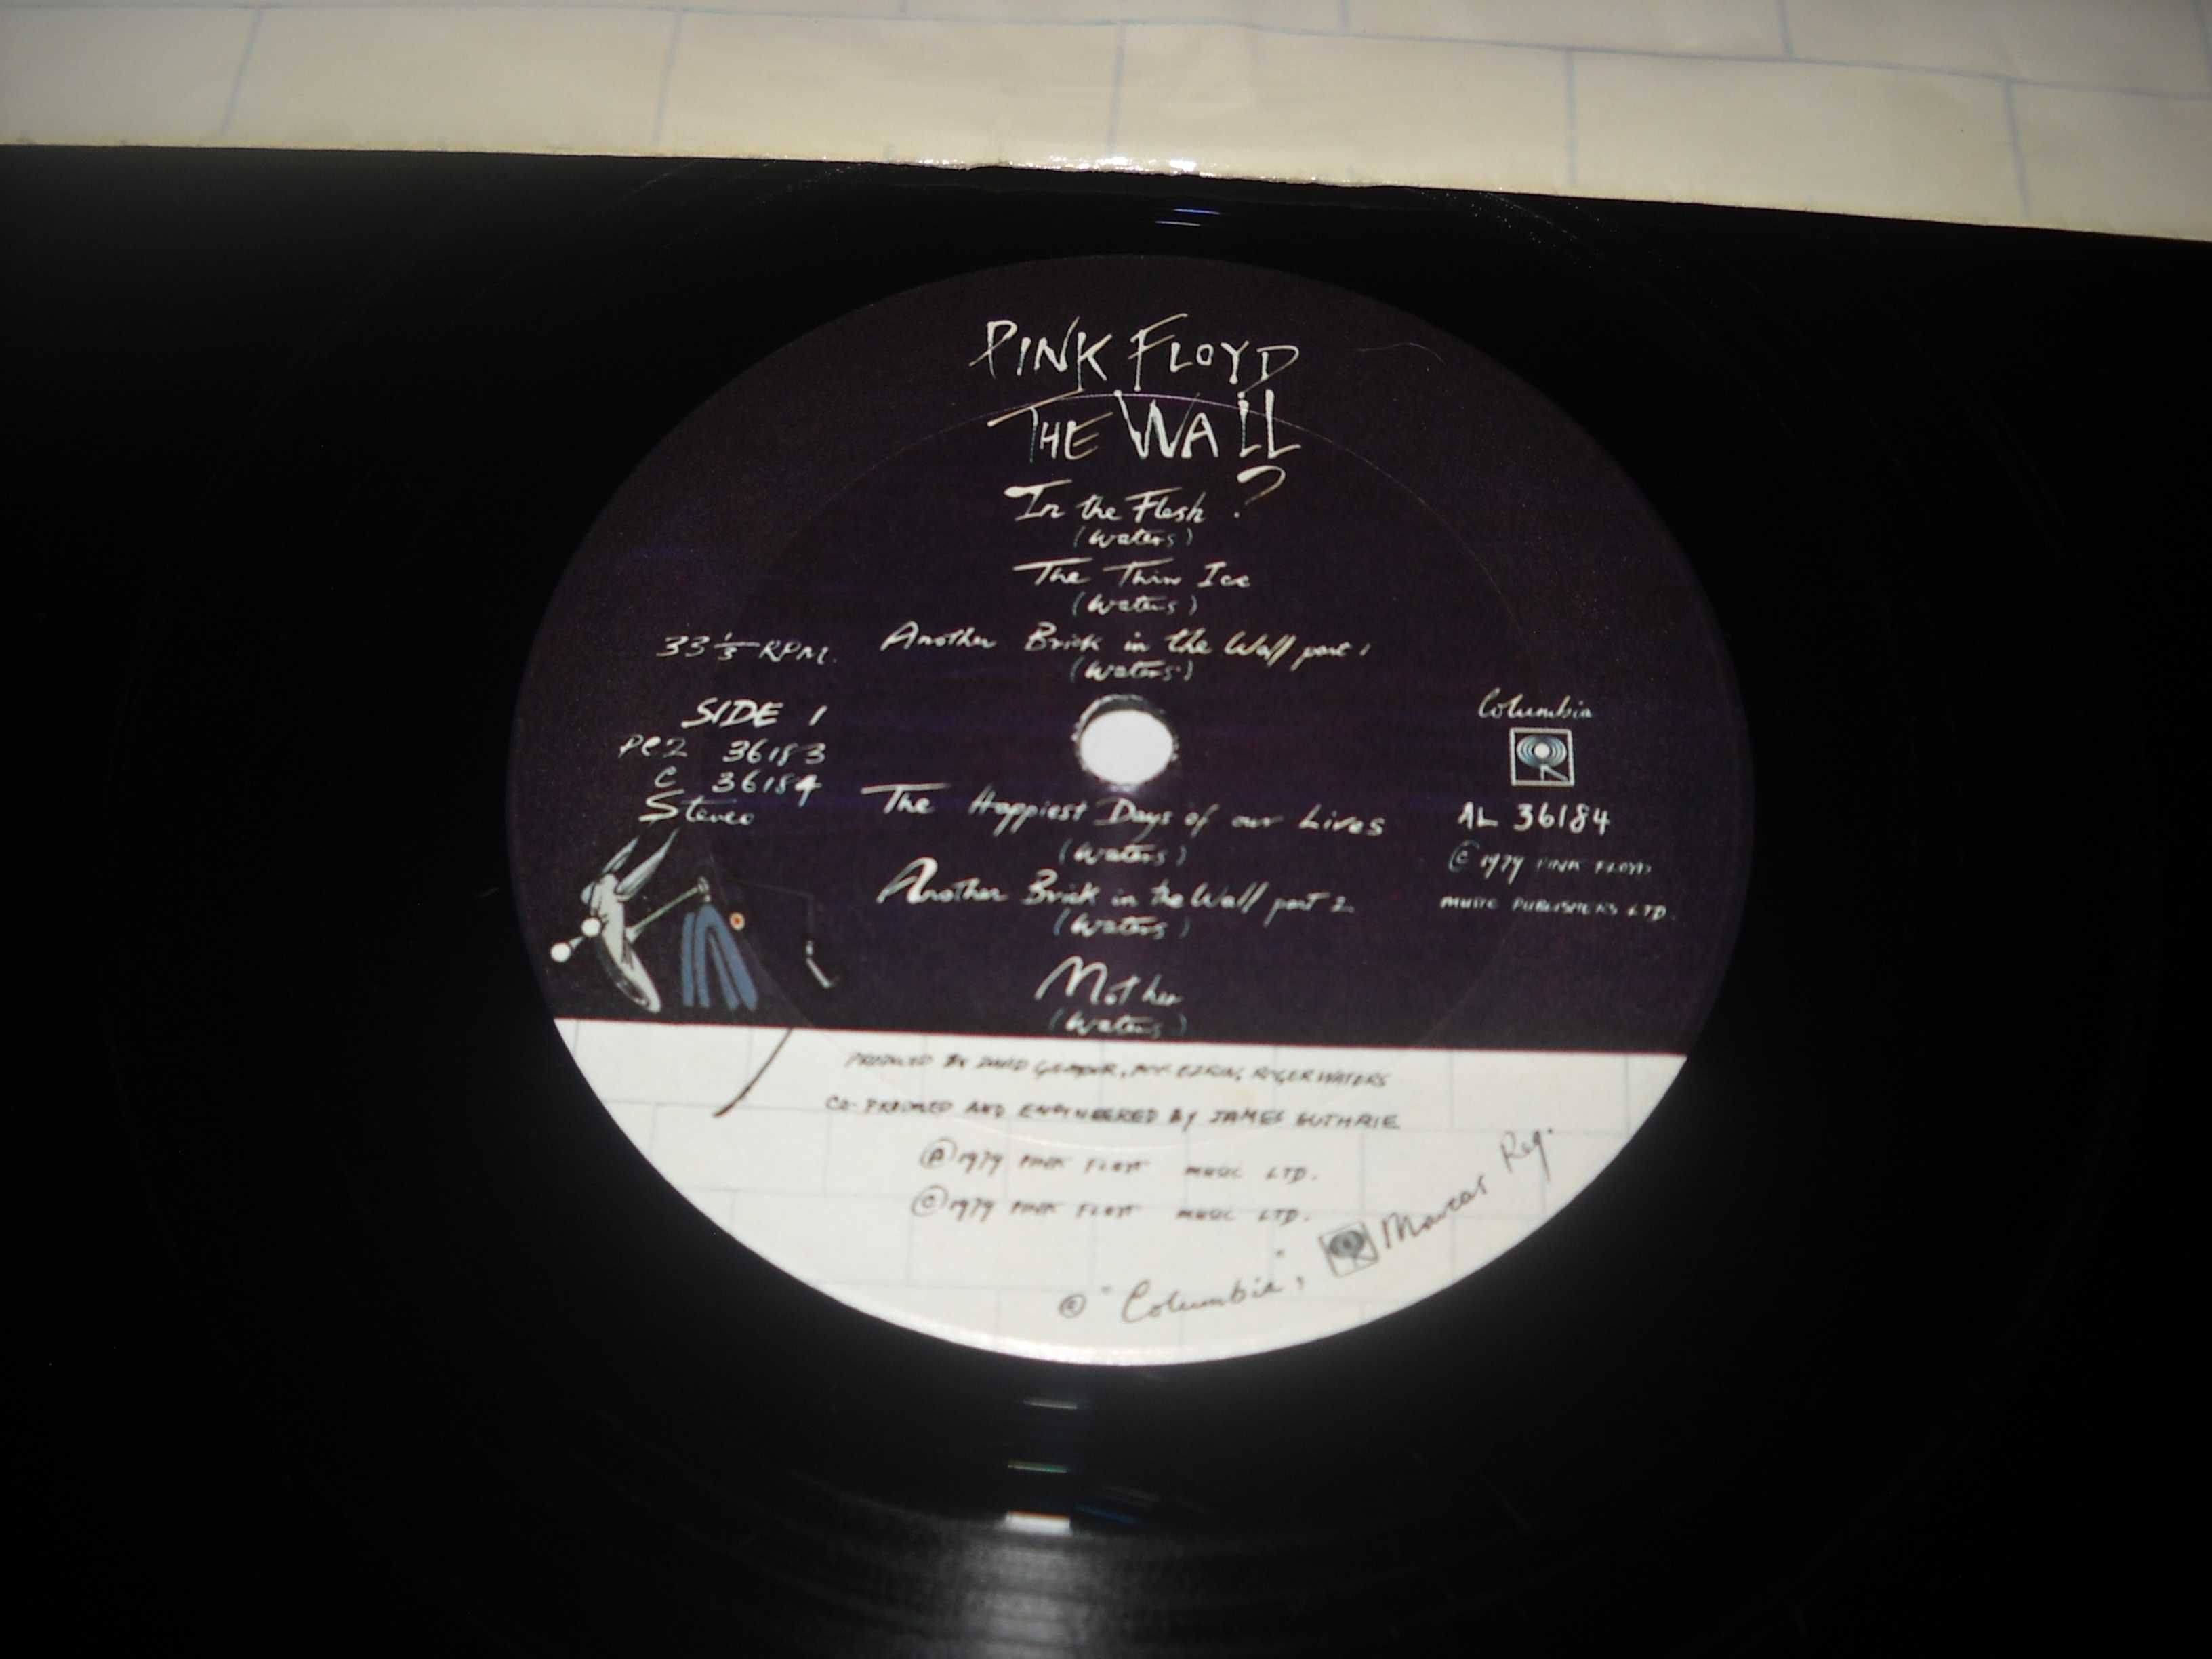 Pink Floyd: The Wall (1979)(2 LP) Made In USA, stare VG+/VG+